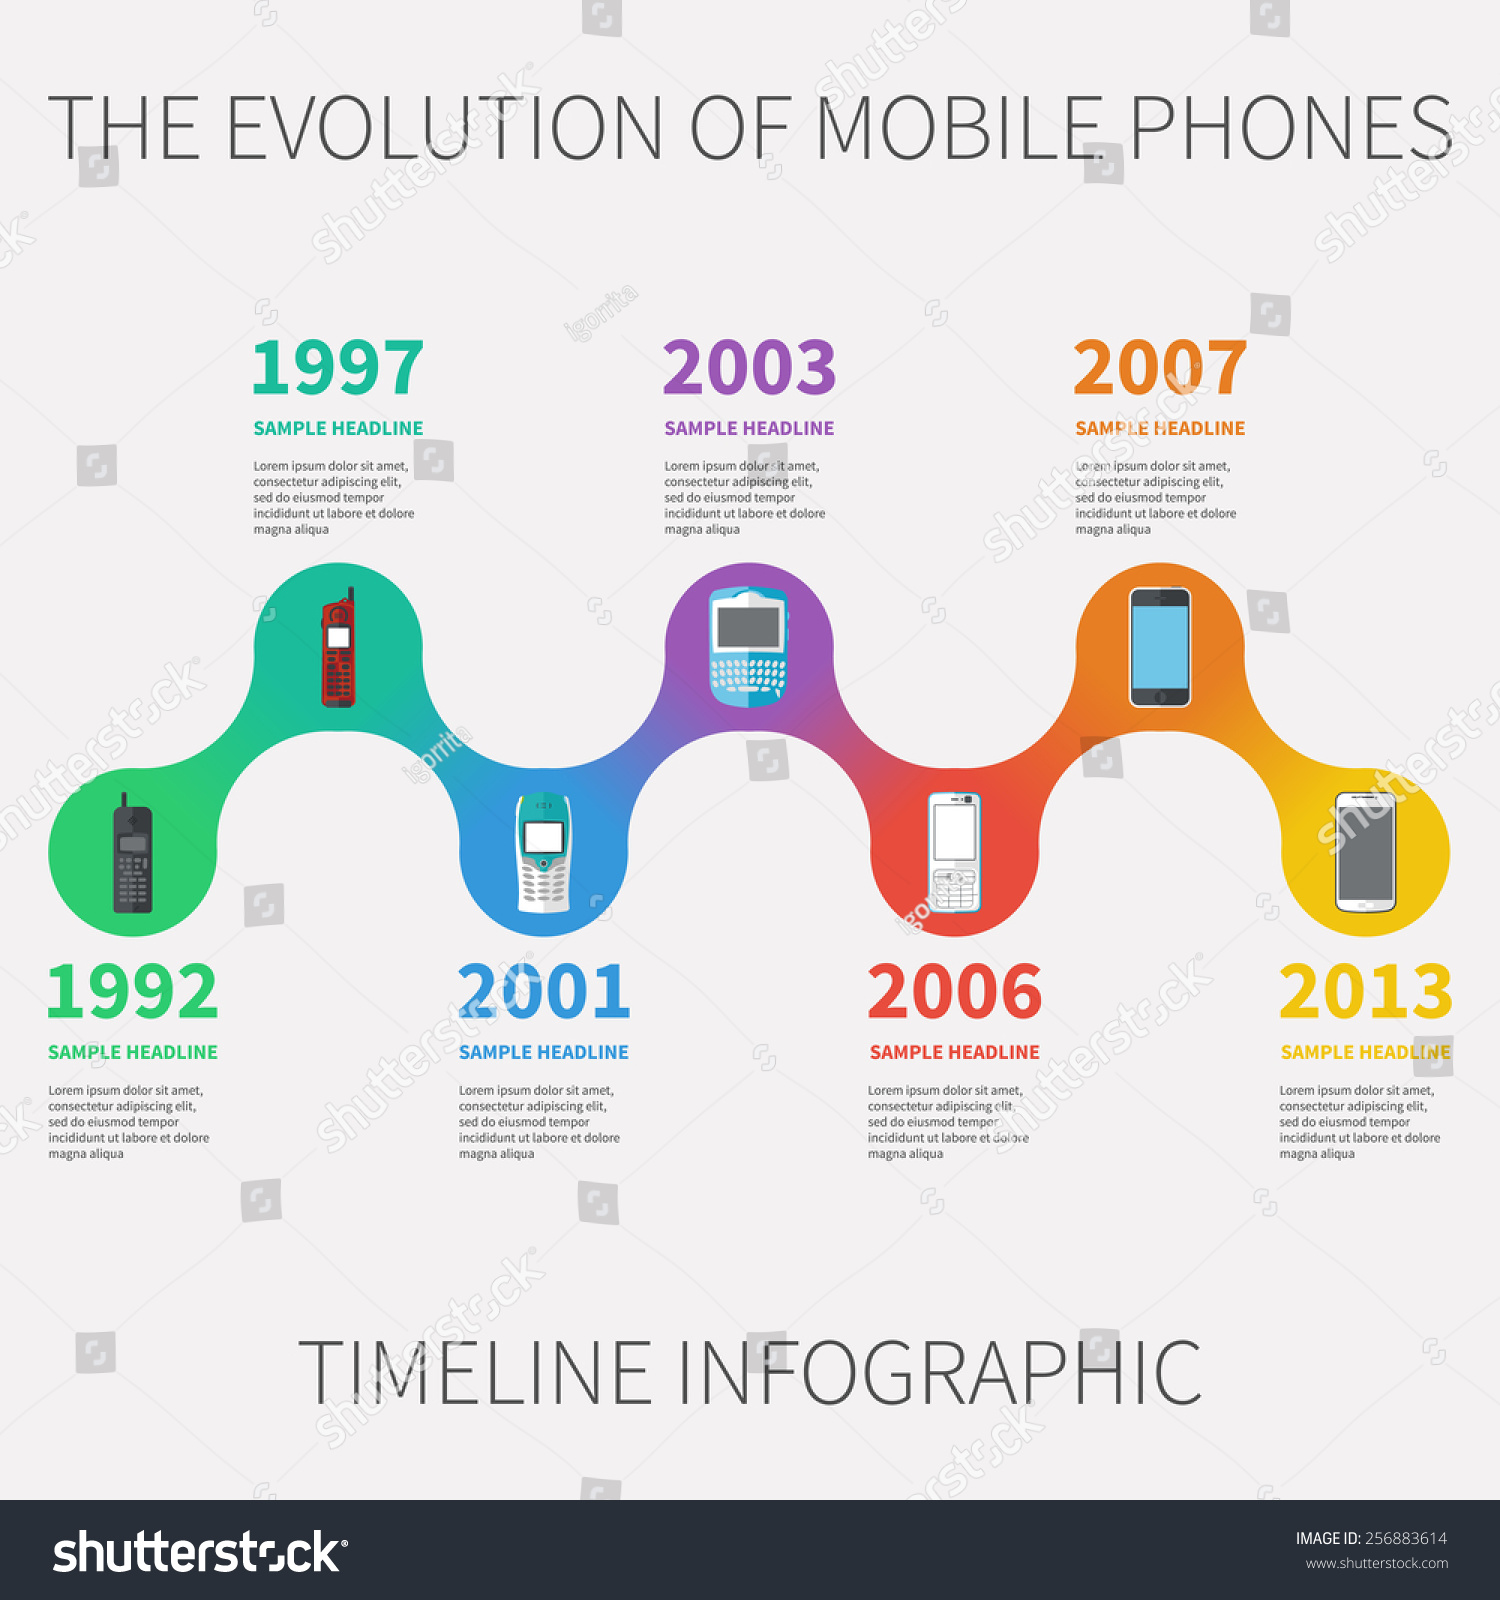 Visual Portrait Of The Evolution Of Mobile Phones Infographic Images